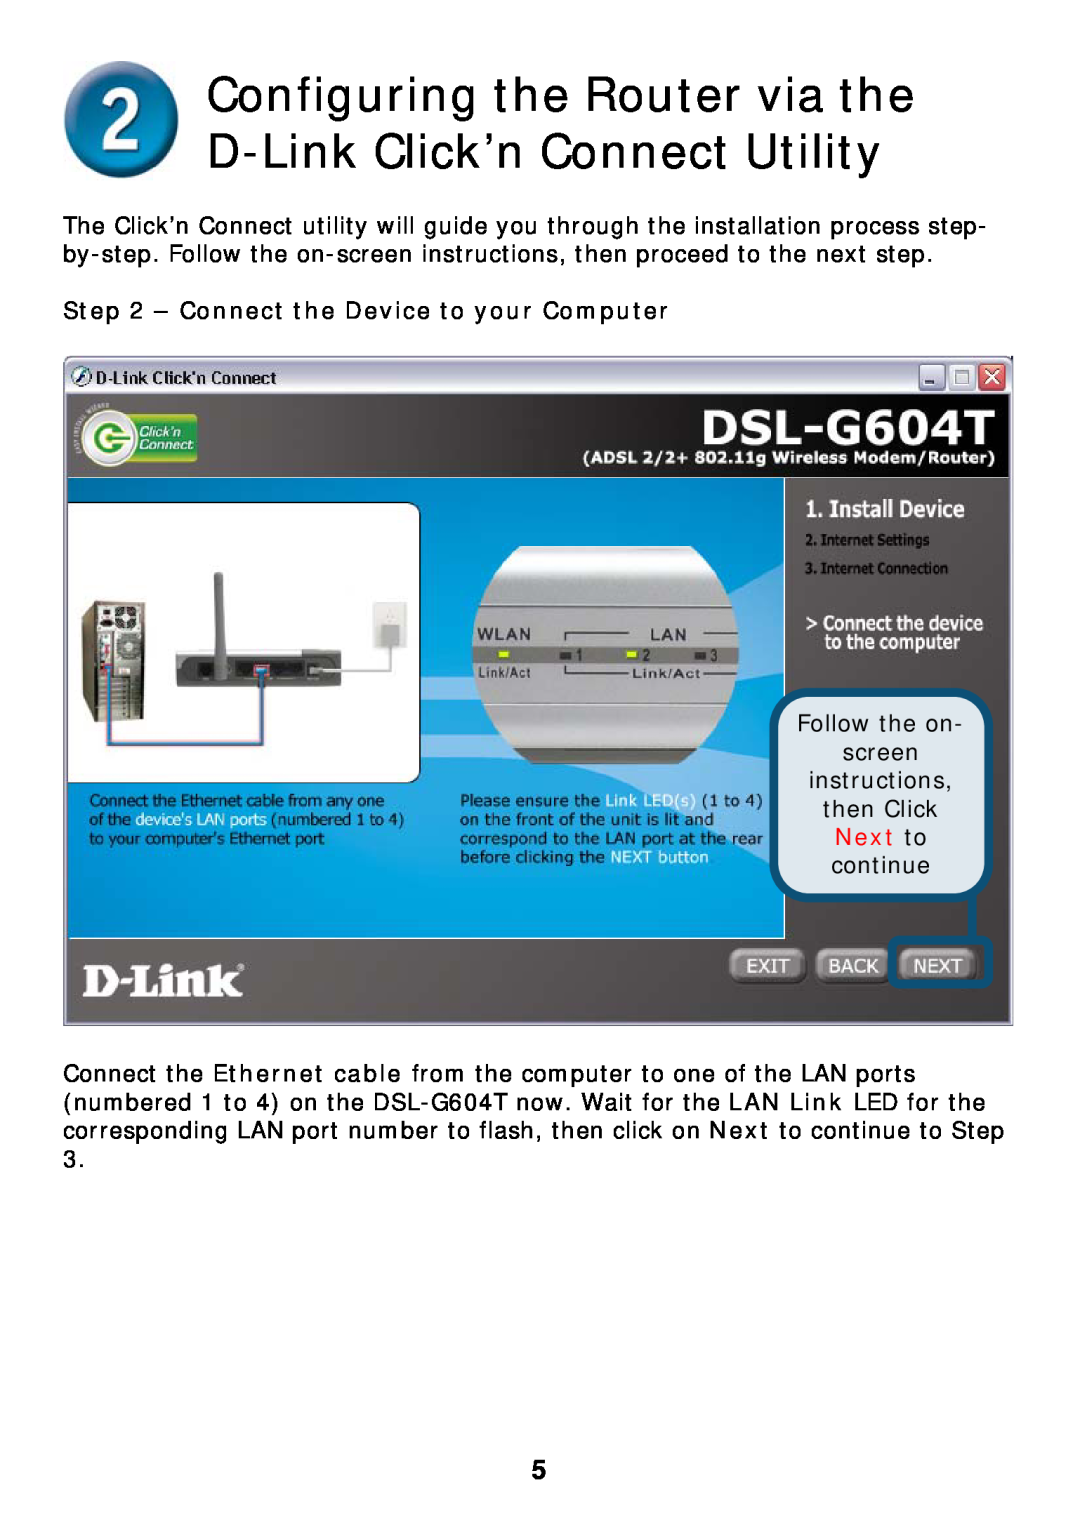 D-Link DSL-G604T Configuring the Router via the D-Link Click’n Connect Utility, Connect the Device to your Computer 